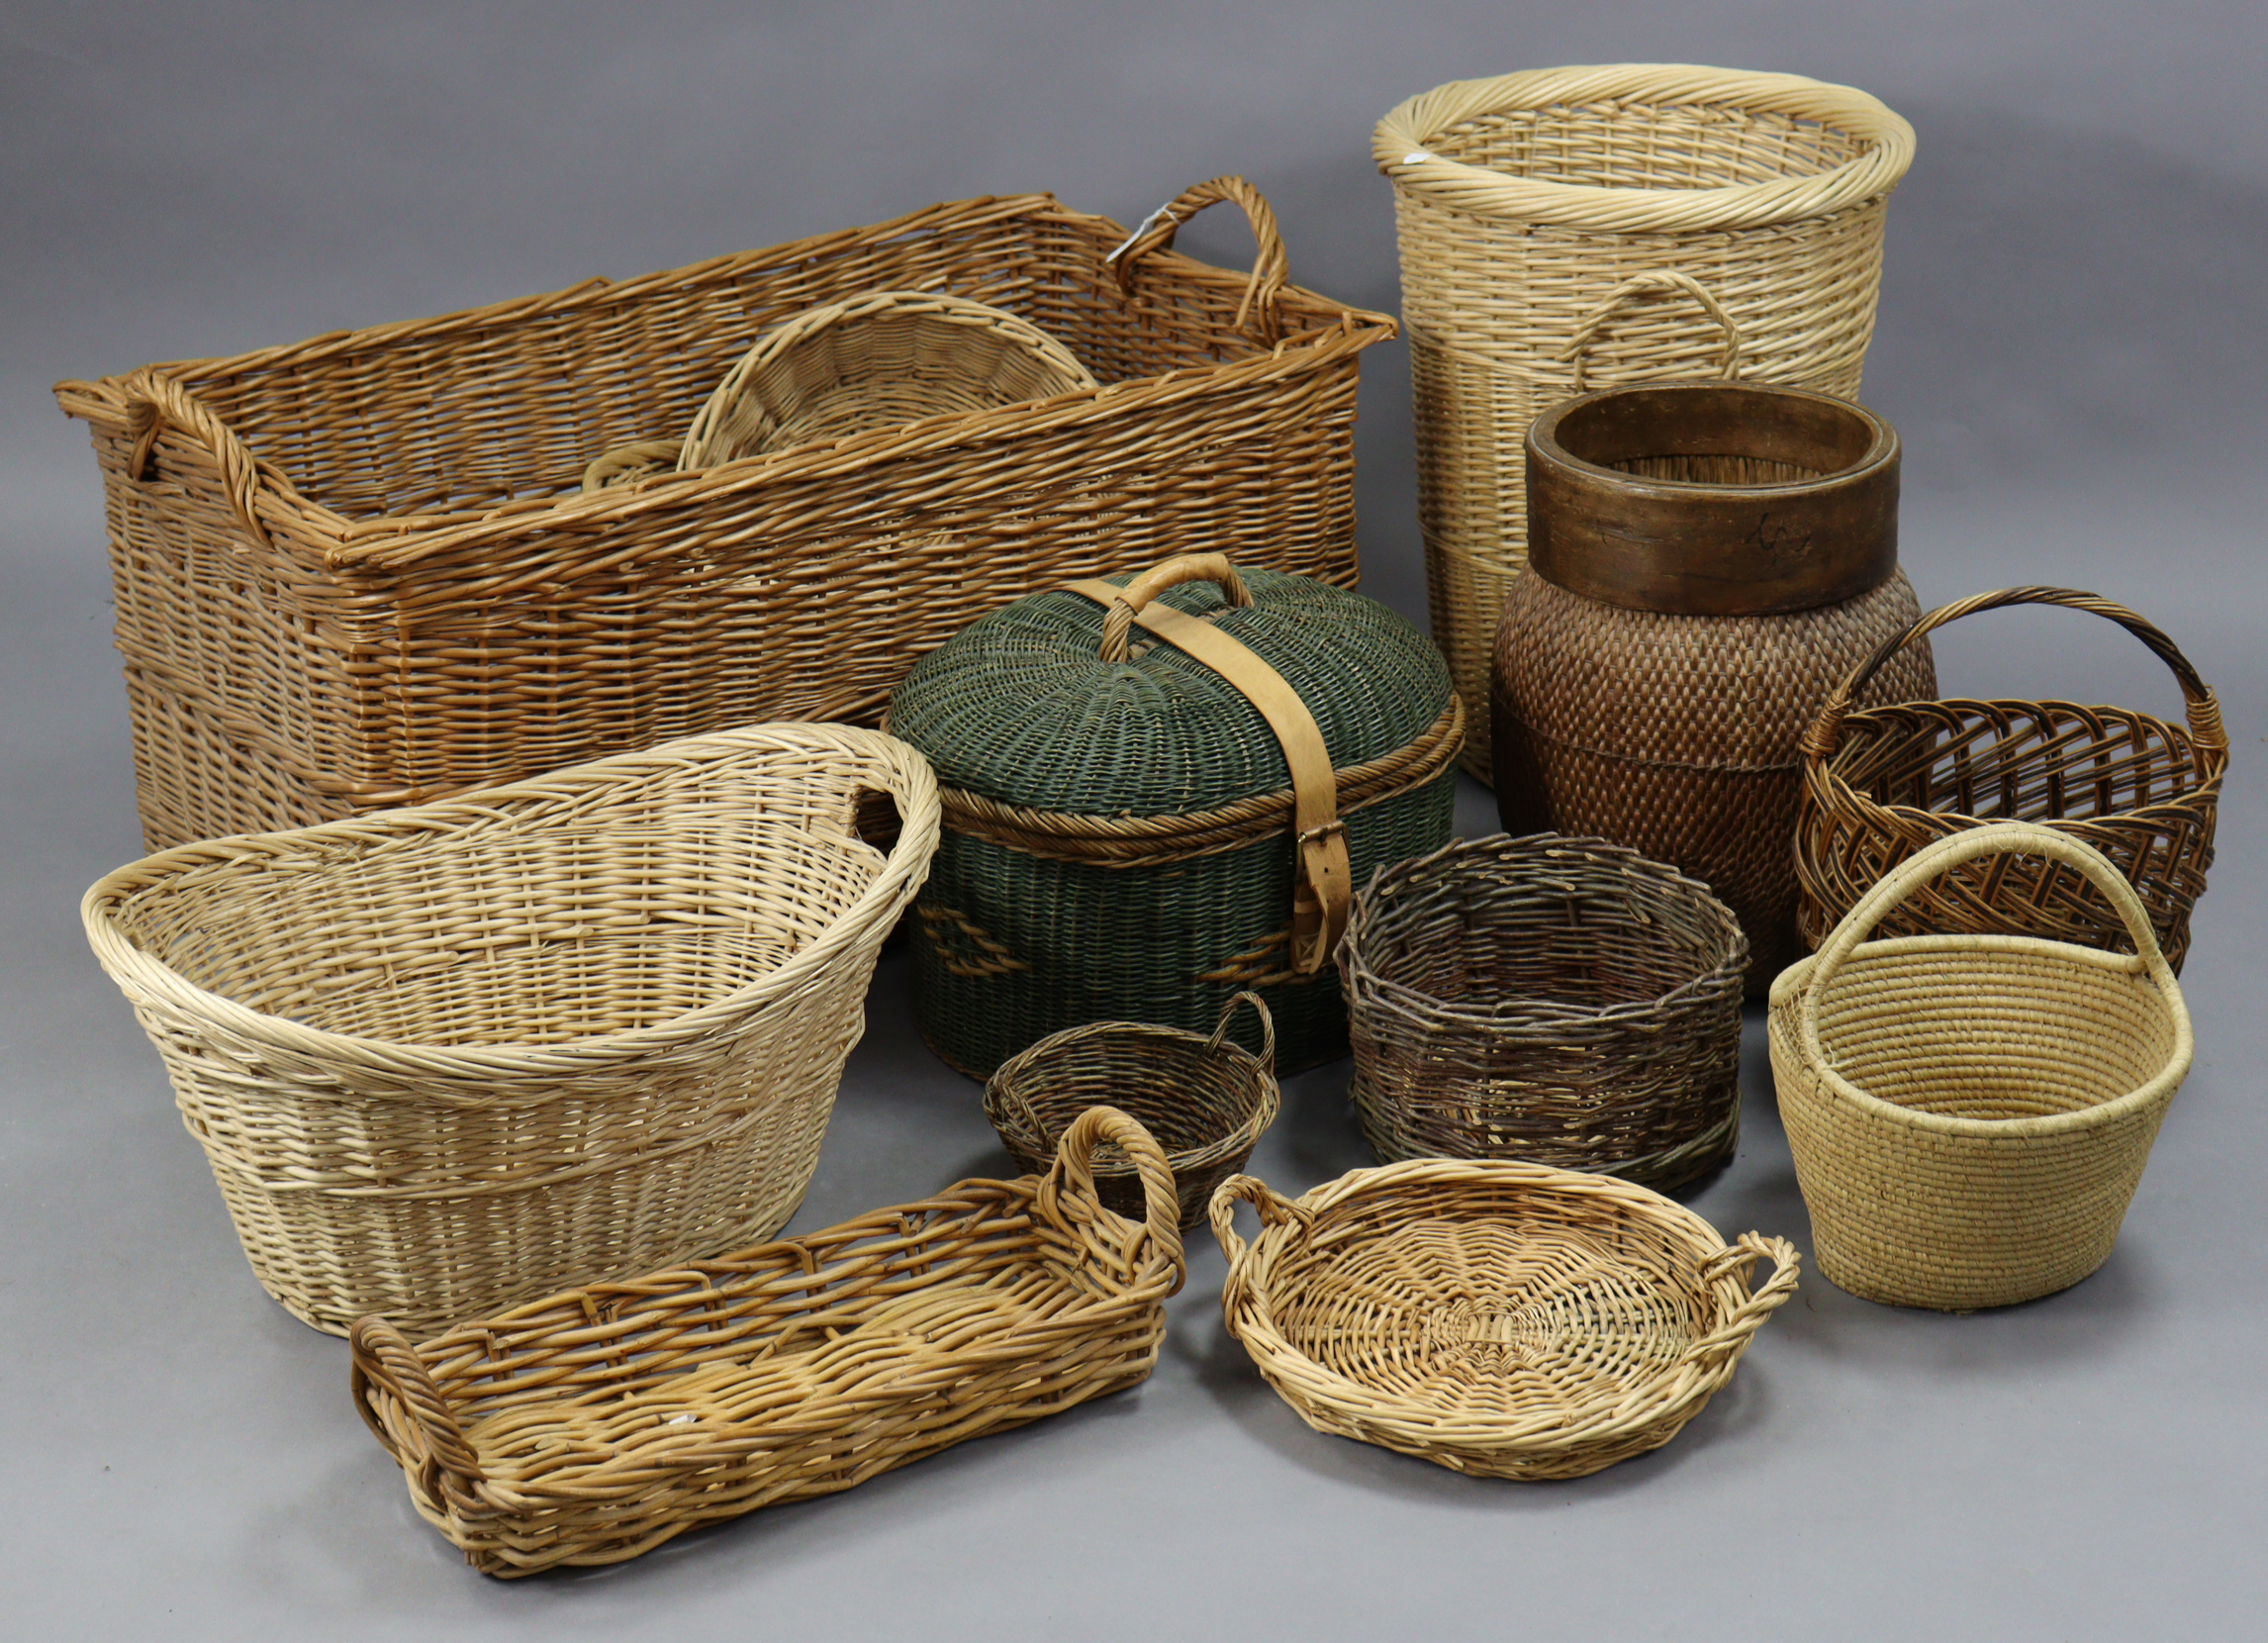 A large wicker rectangular two-handled laundry basket, 40” wide; together with various other